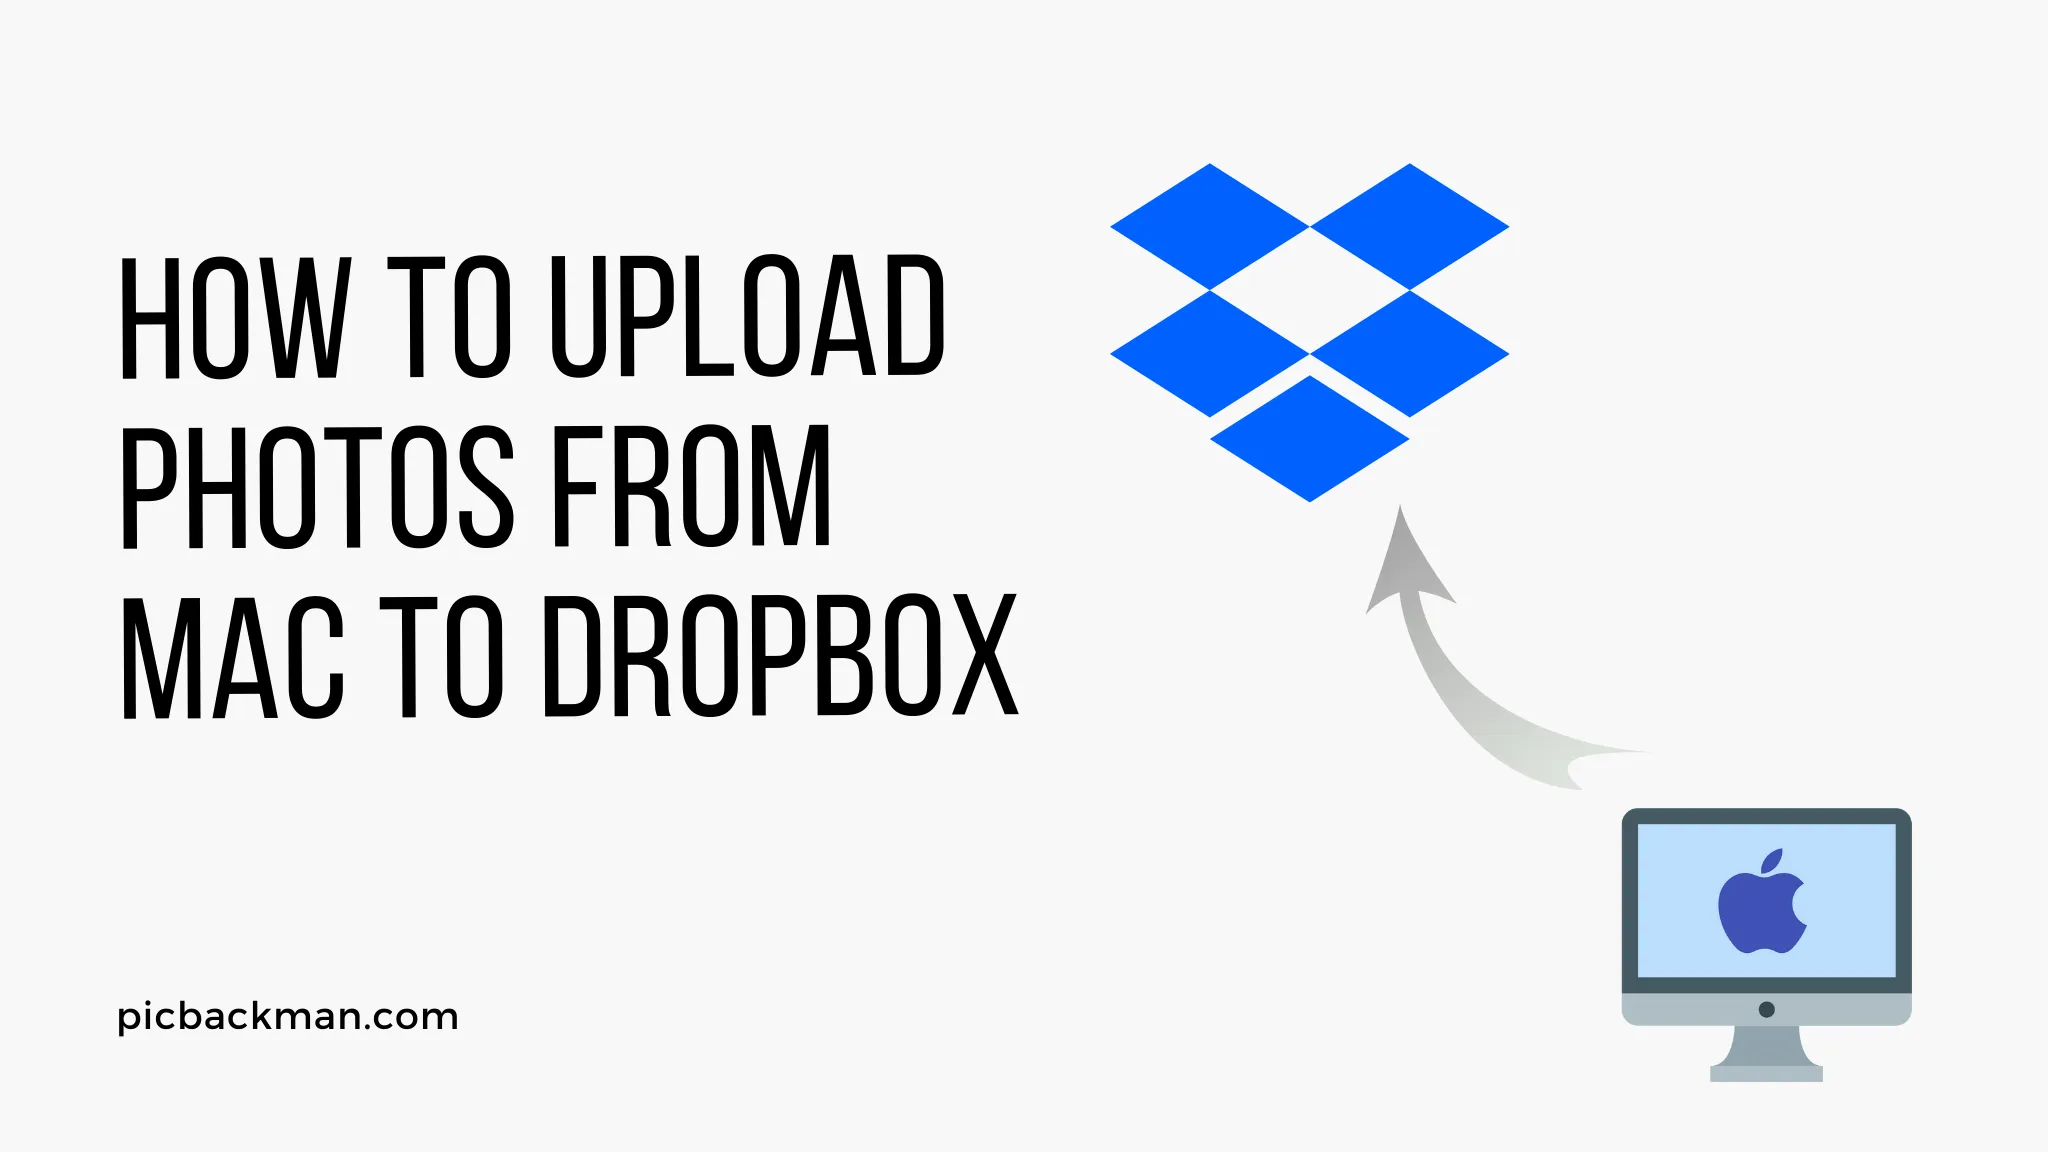 How to Upload Photos from Mac to Dropbox?